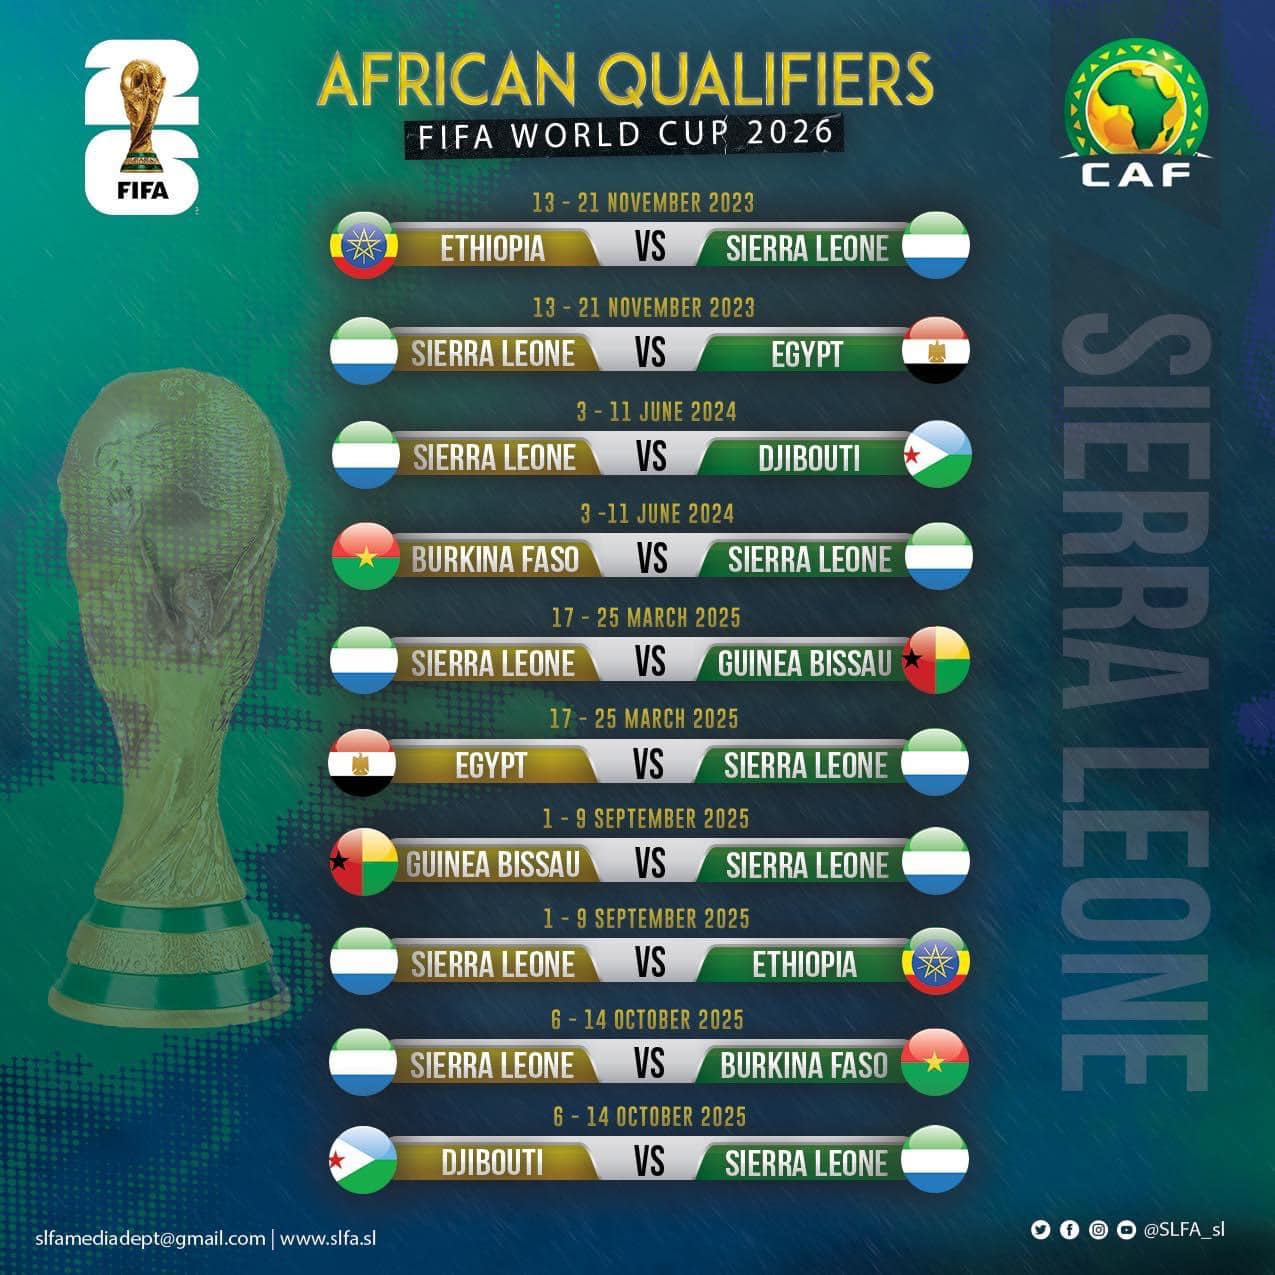 The draw for the African qualifiers for the 2026 World Cup finals placed Sierra Leone in Group A with five teams: Egypt, Burkina Faso, Ethiopia, Guinea-Bissau, and Djibouti.